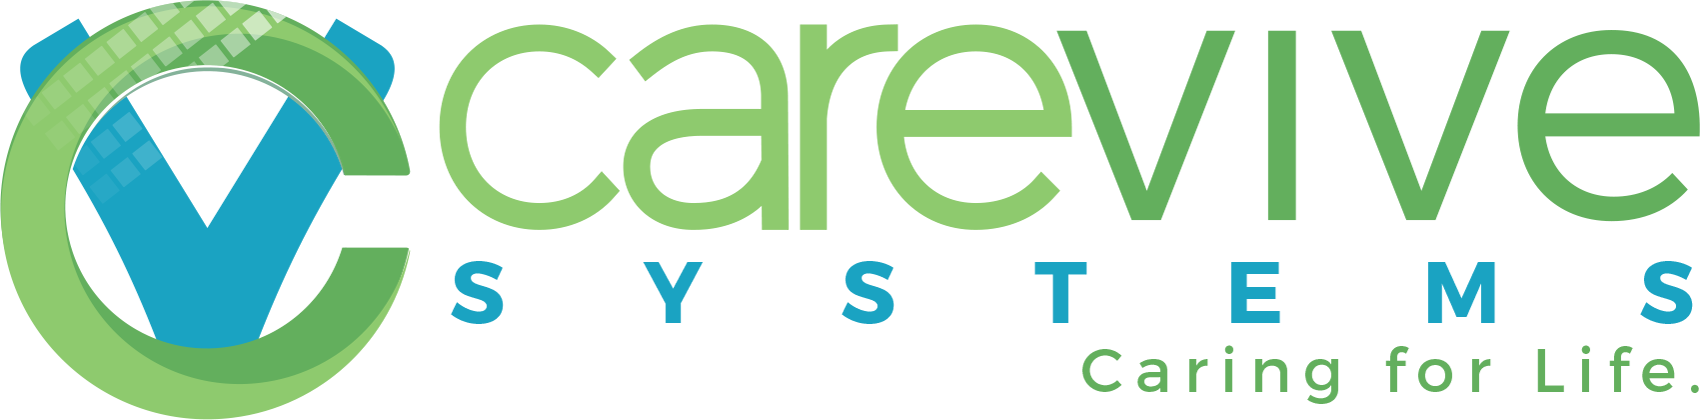 Carevive Systems, Inc.